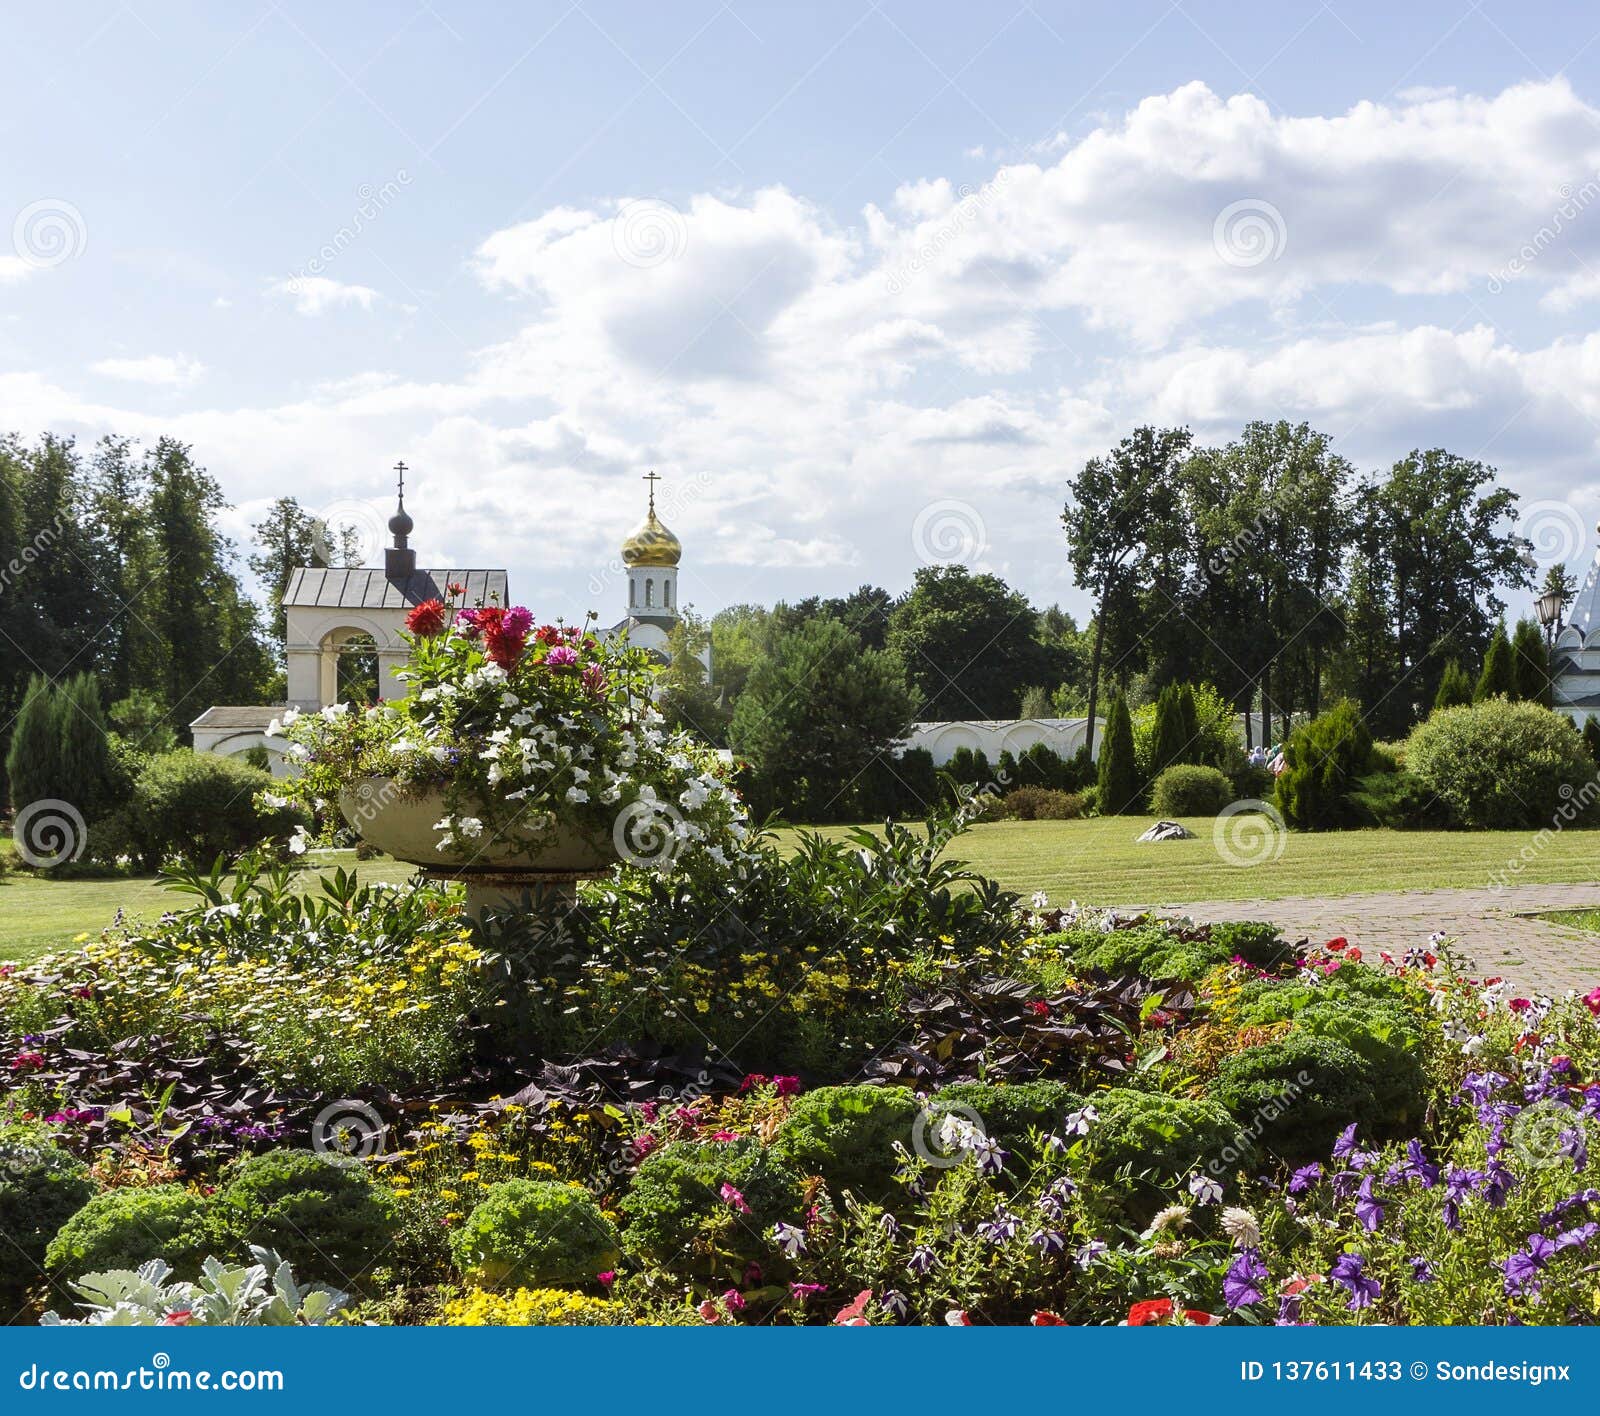 Greenery Floral Historical Monastery Garden with Colorful Spring Summer